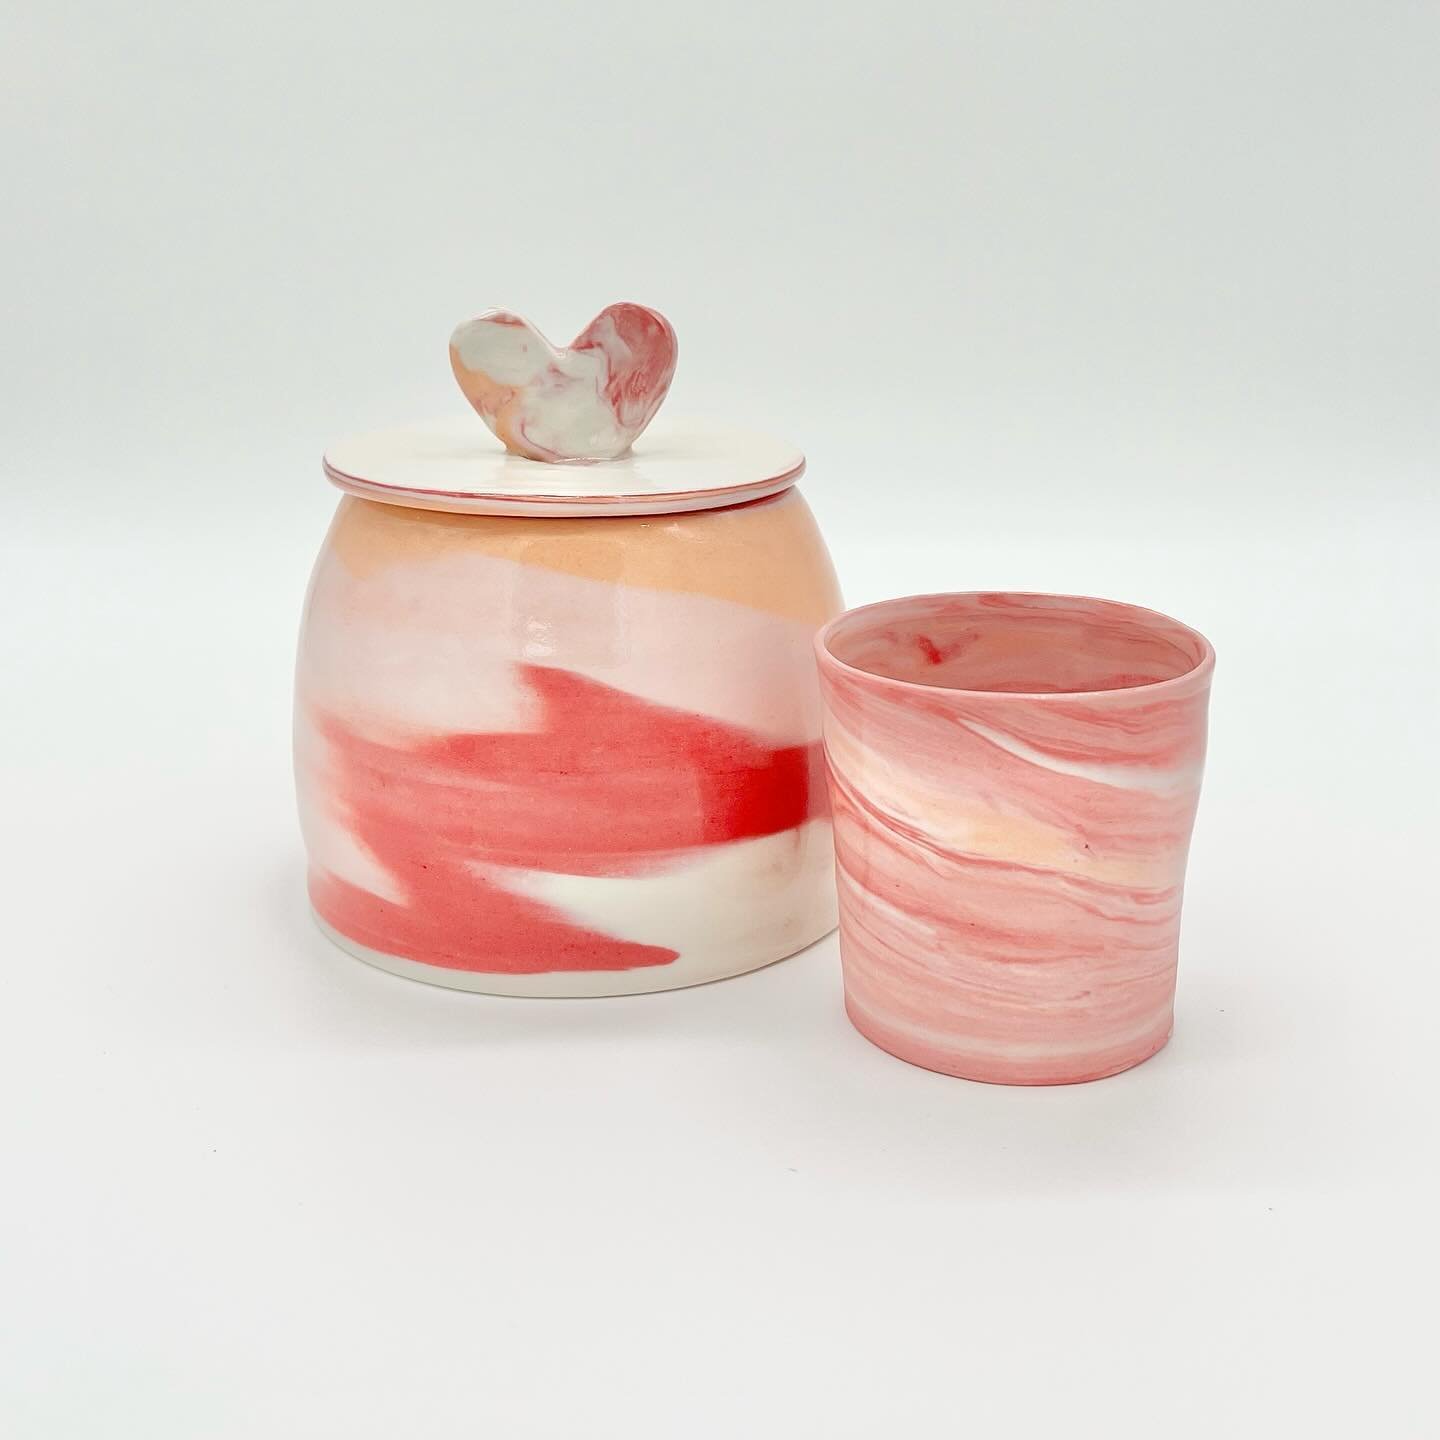 My little valentine.

Initially, my 8-year-old asked me for a tea set.  Seems fair to me that if your mom spends her days making pottery, then a request for a pink, red, and orange tea set is an immediate yes. 

I made all the pieces and was about to